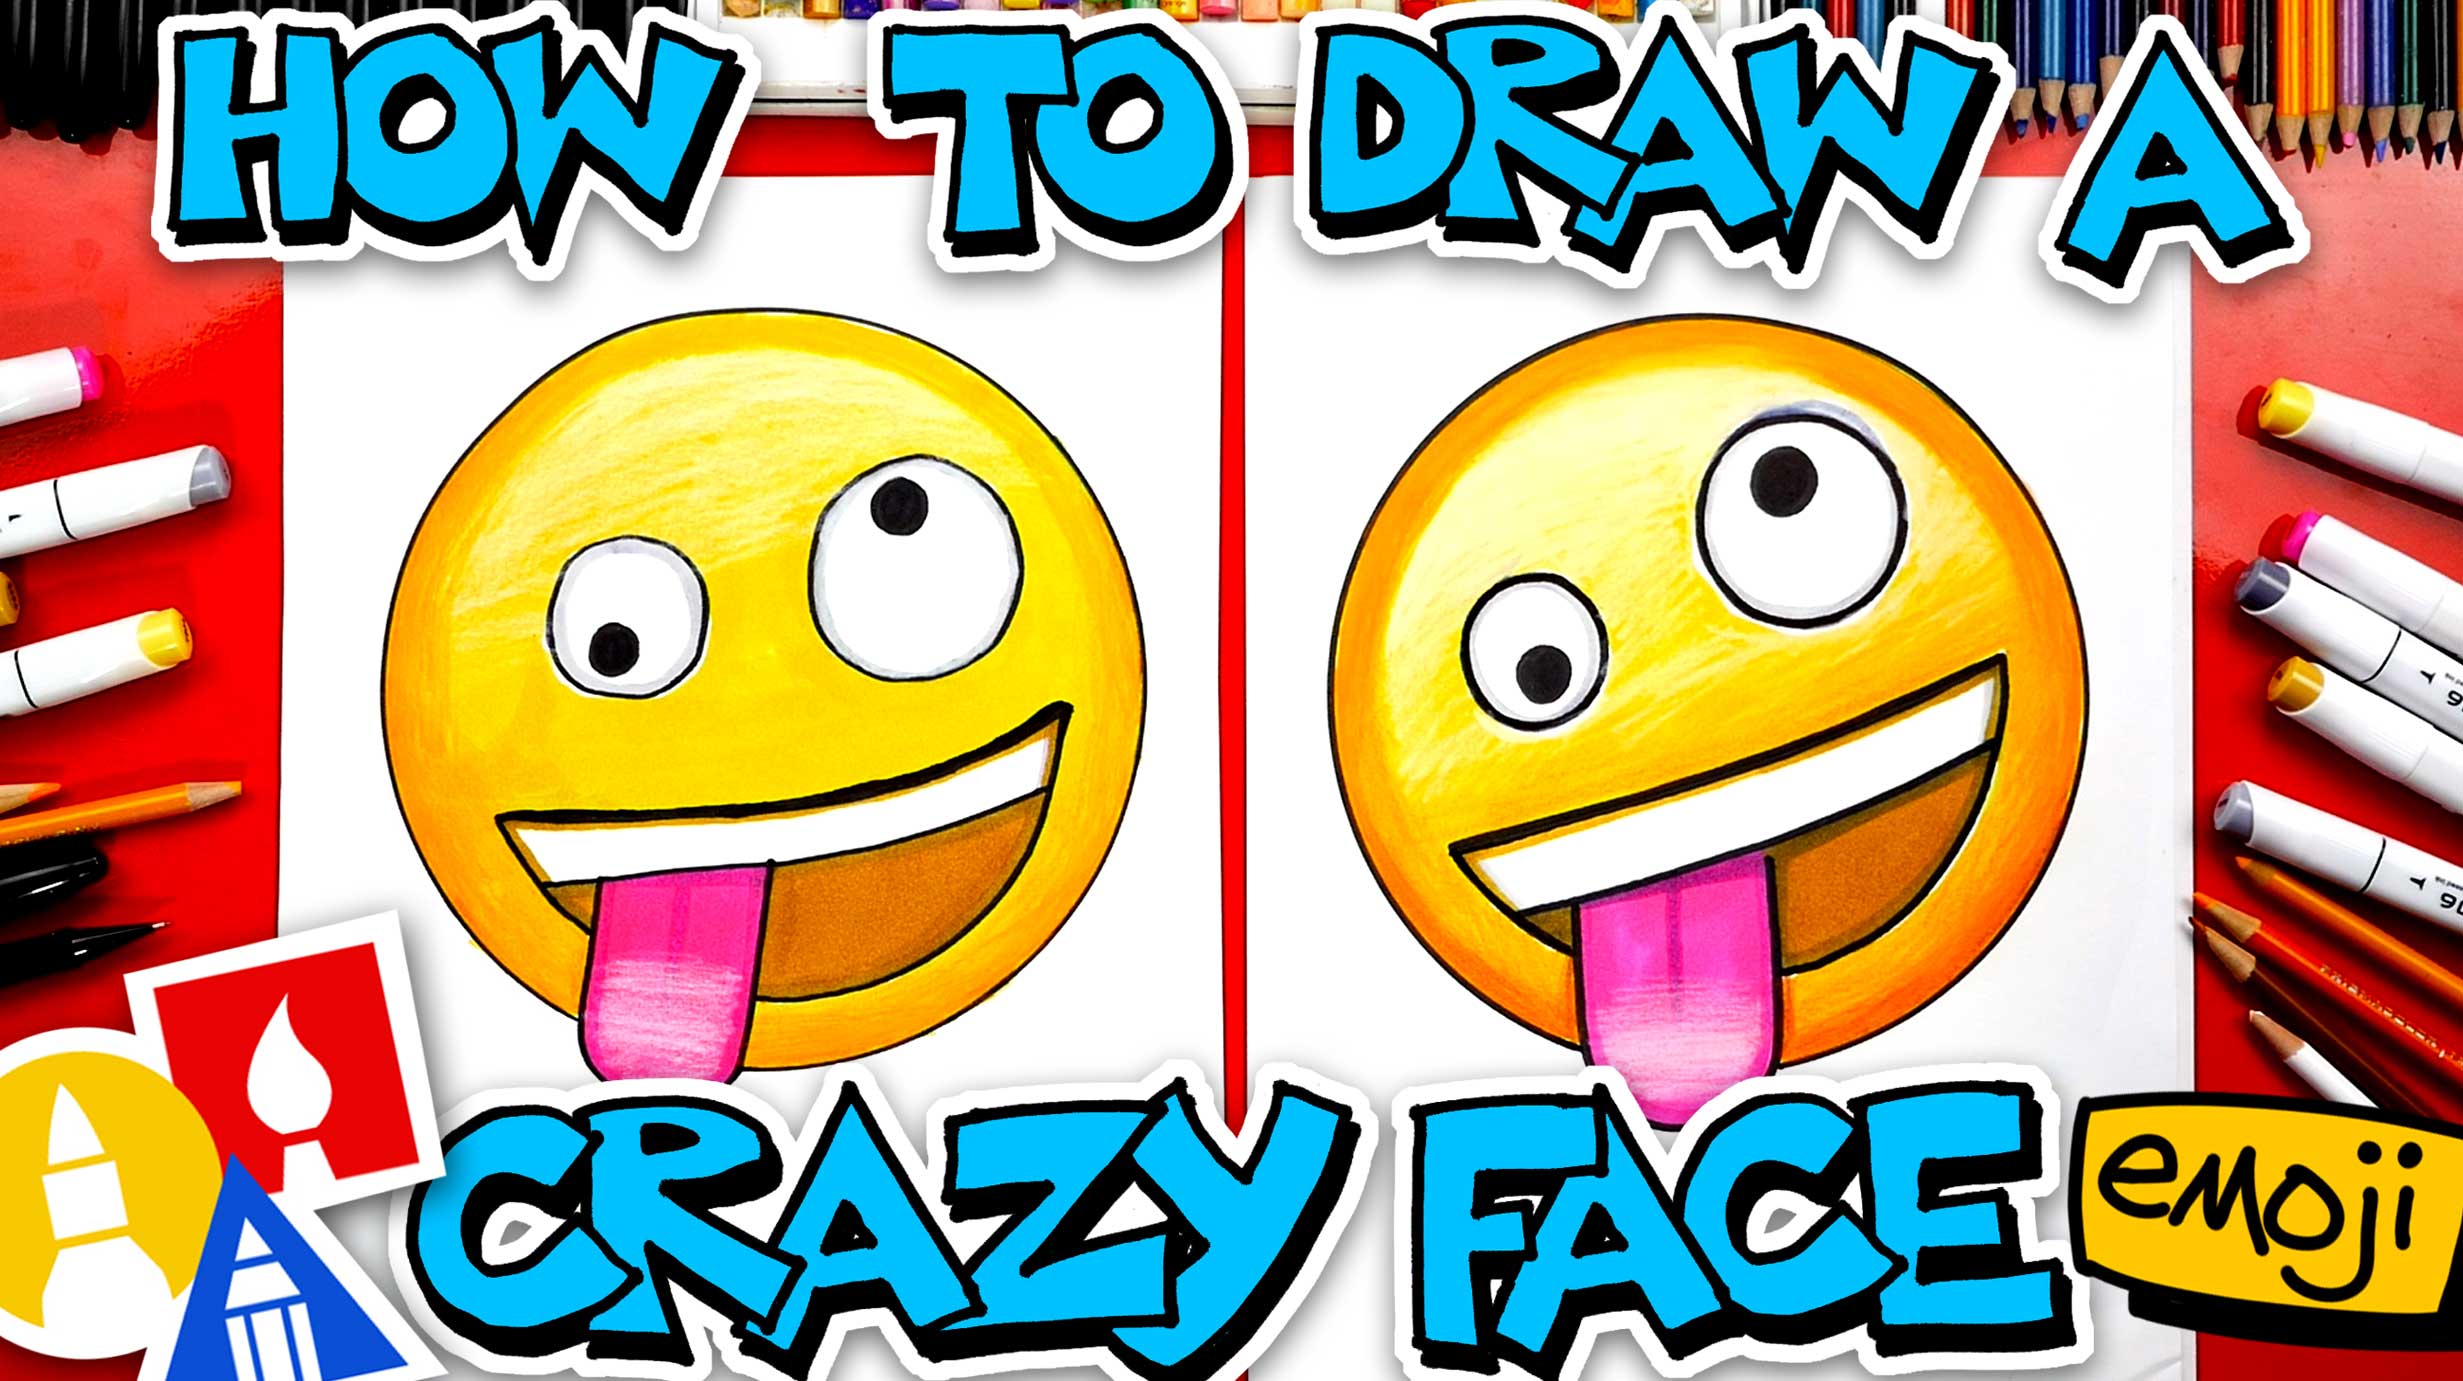 🤪 How To Draw The Crazy Face Emoji 🤪 - Art For Kids Hub